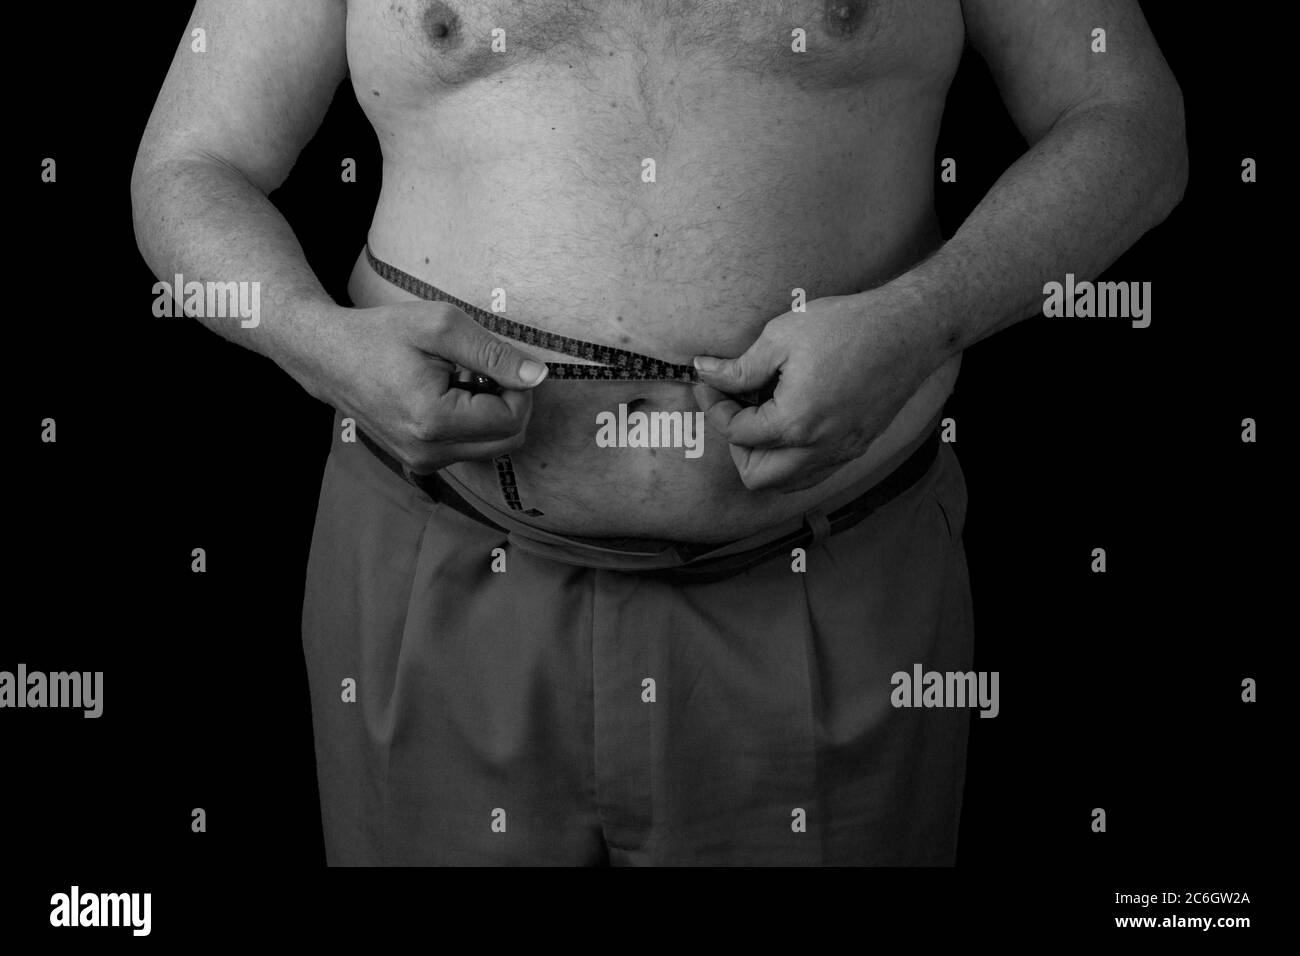 Fat man holding a measuring tape, measure your abdomen. Weight Loss. Black and white Photo on a black background isolated Stock Photo